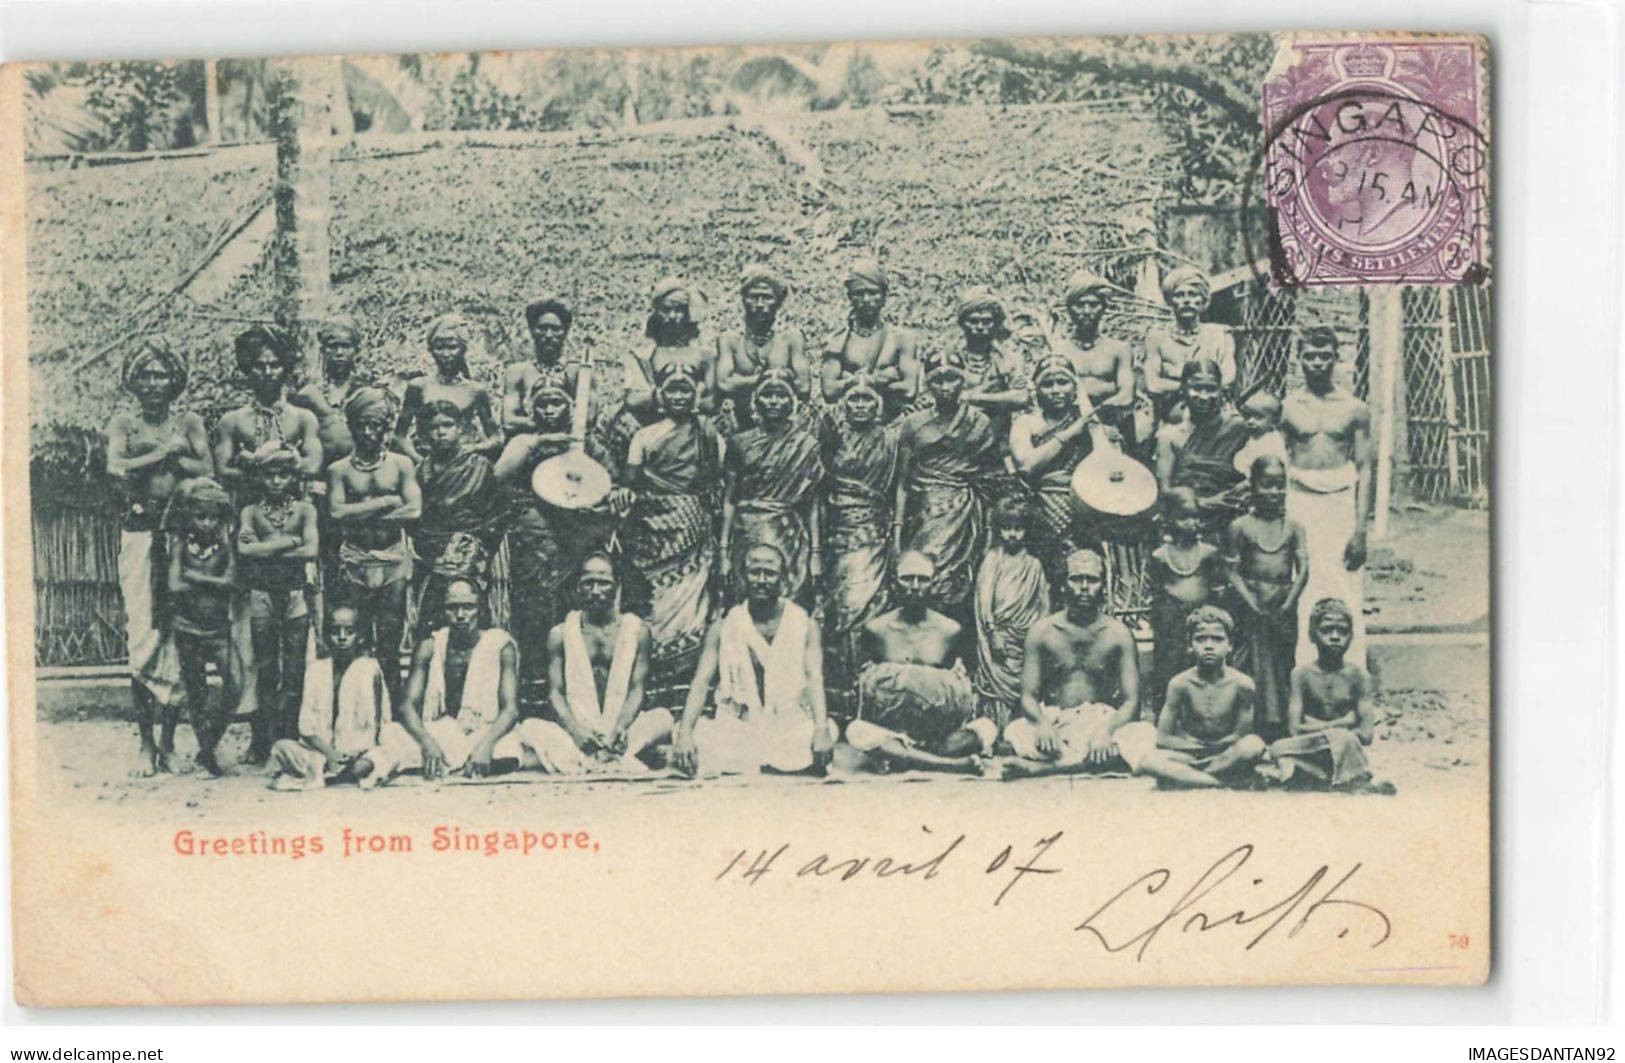 SINGAPOUR #FG51838 SINGAPORE GREETINGS FROM INDIA INDE INDOUS 1907 - Singapur